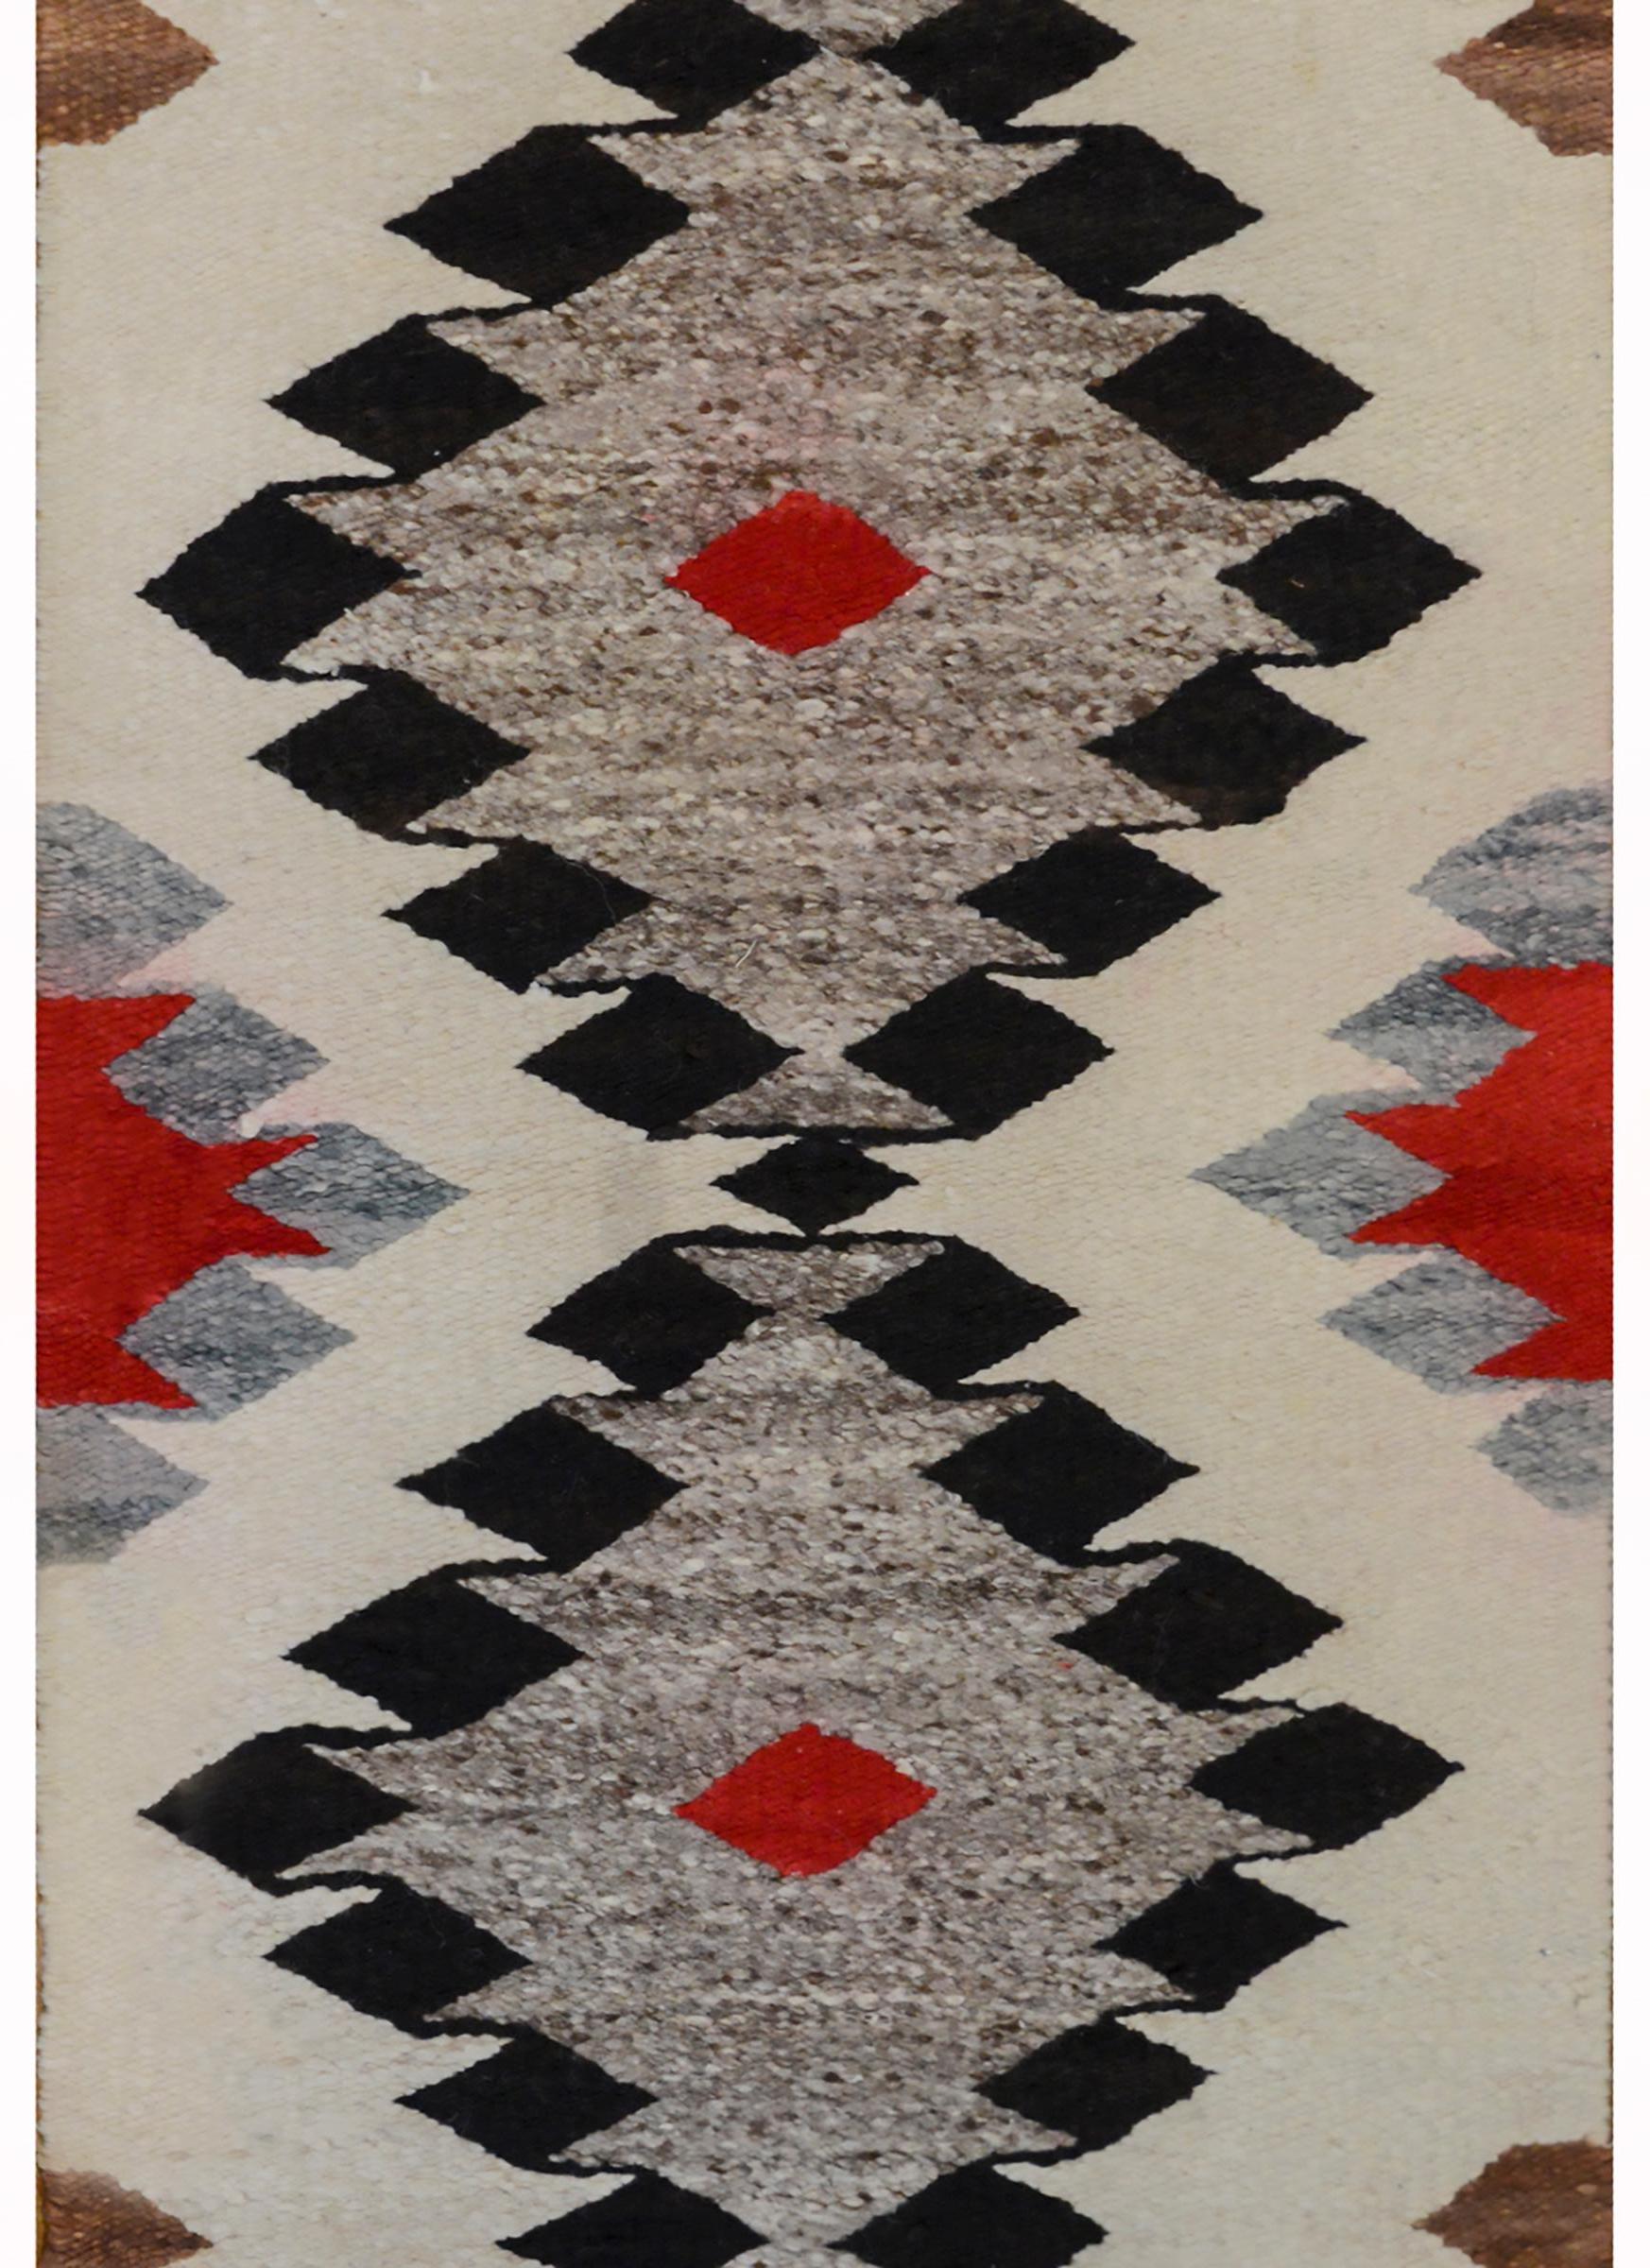 A bold mid-20th century Navajo rug with two large black, gray, and crimson diamonds on a cream colored field with other smaller diamonds.